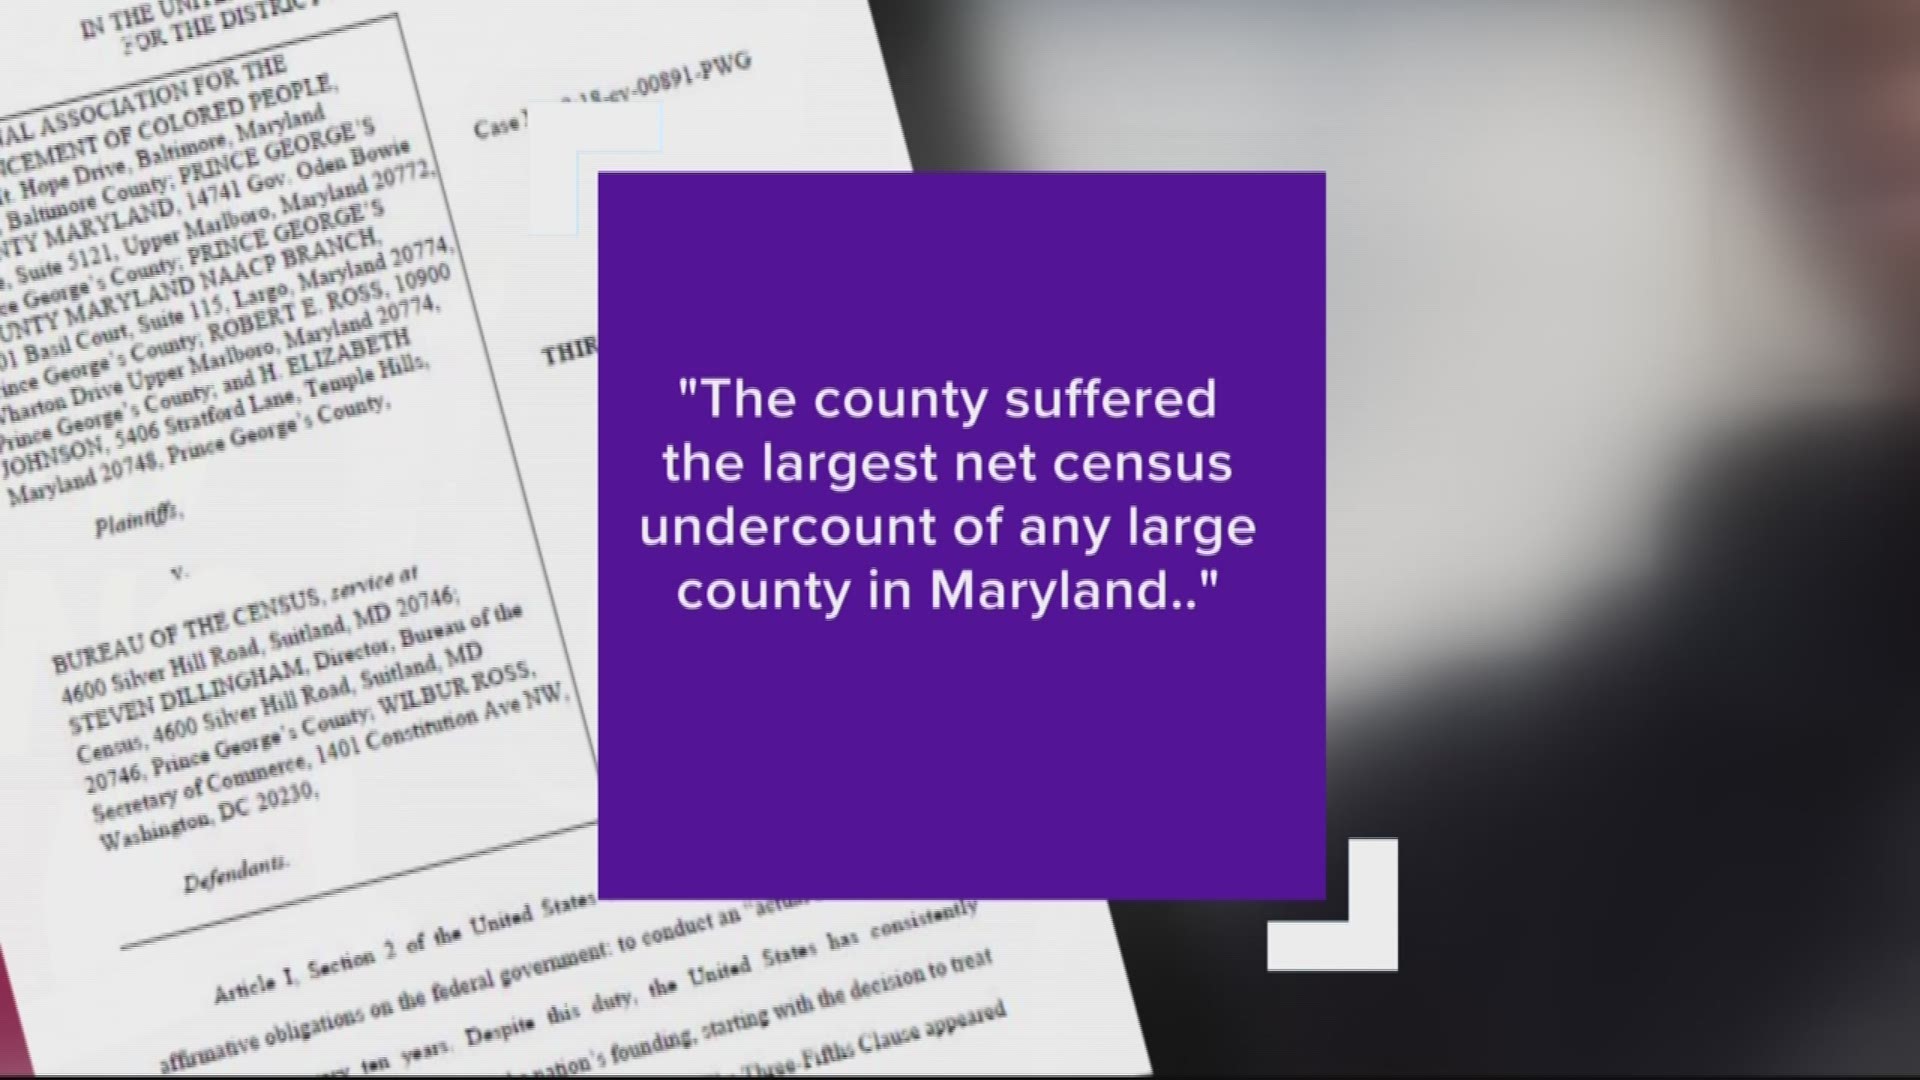 The county is alleging the system is rigged to under count African Americans, Immigrants and other populations that are viewed as difficult to count.